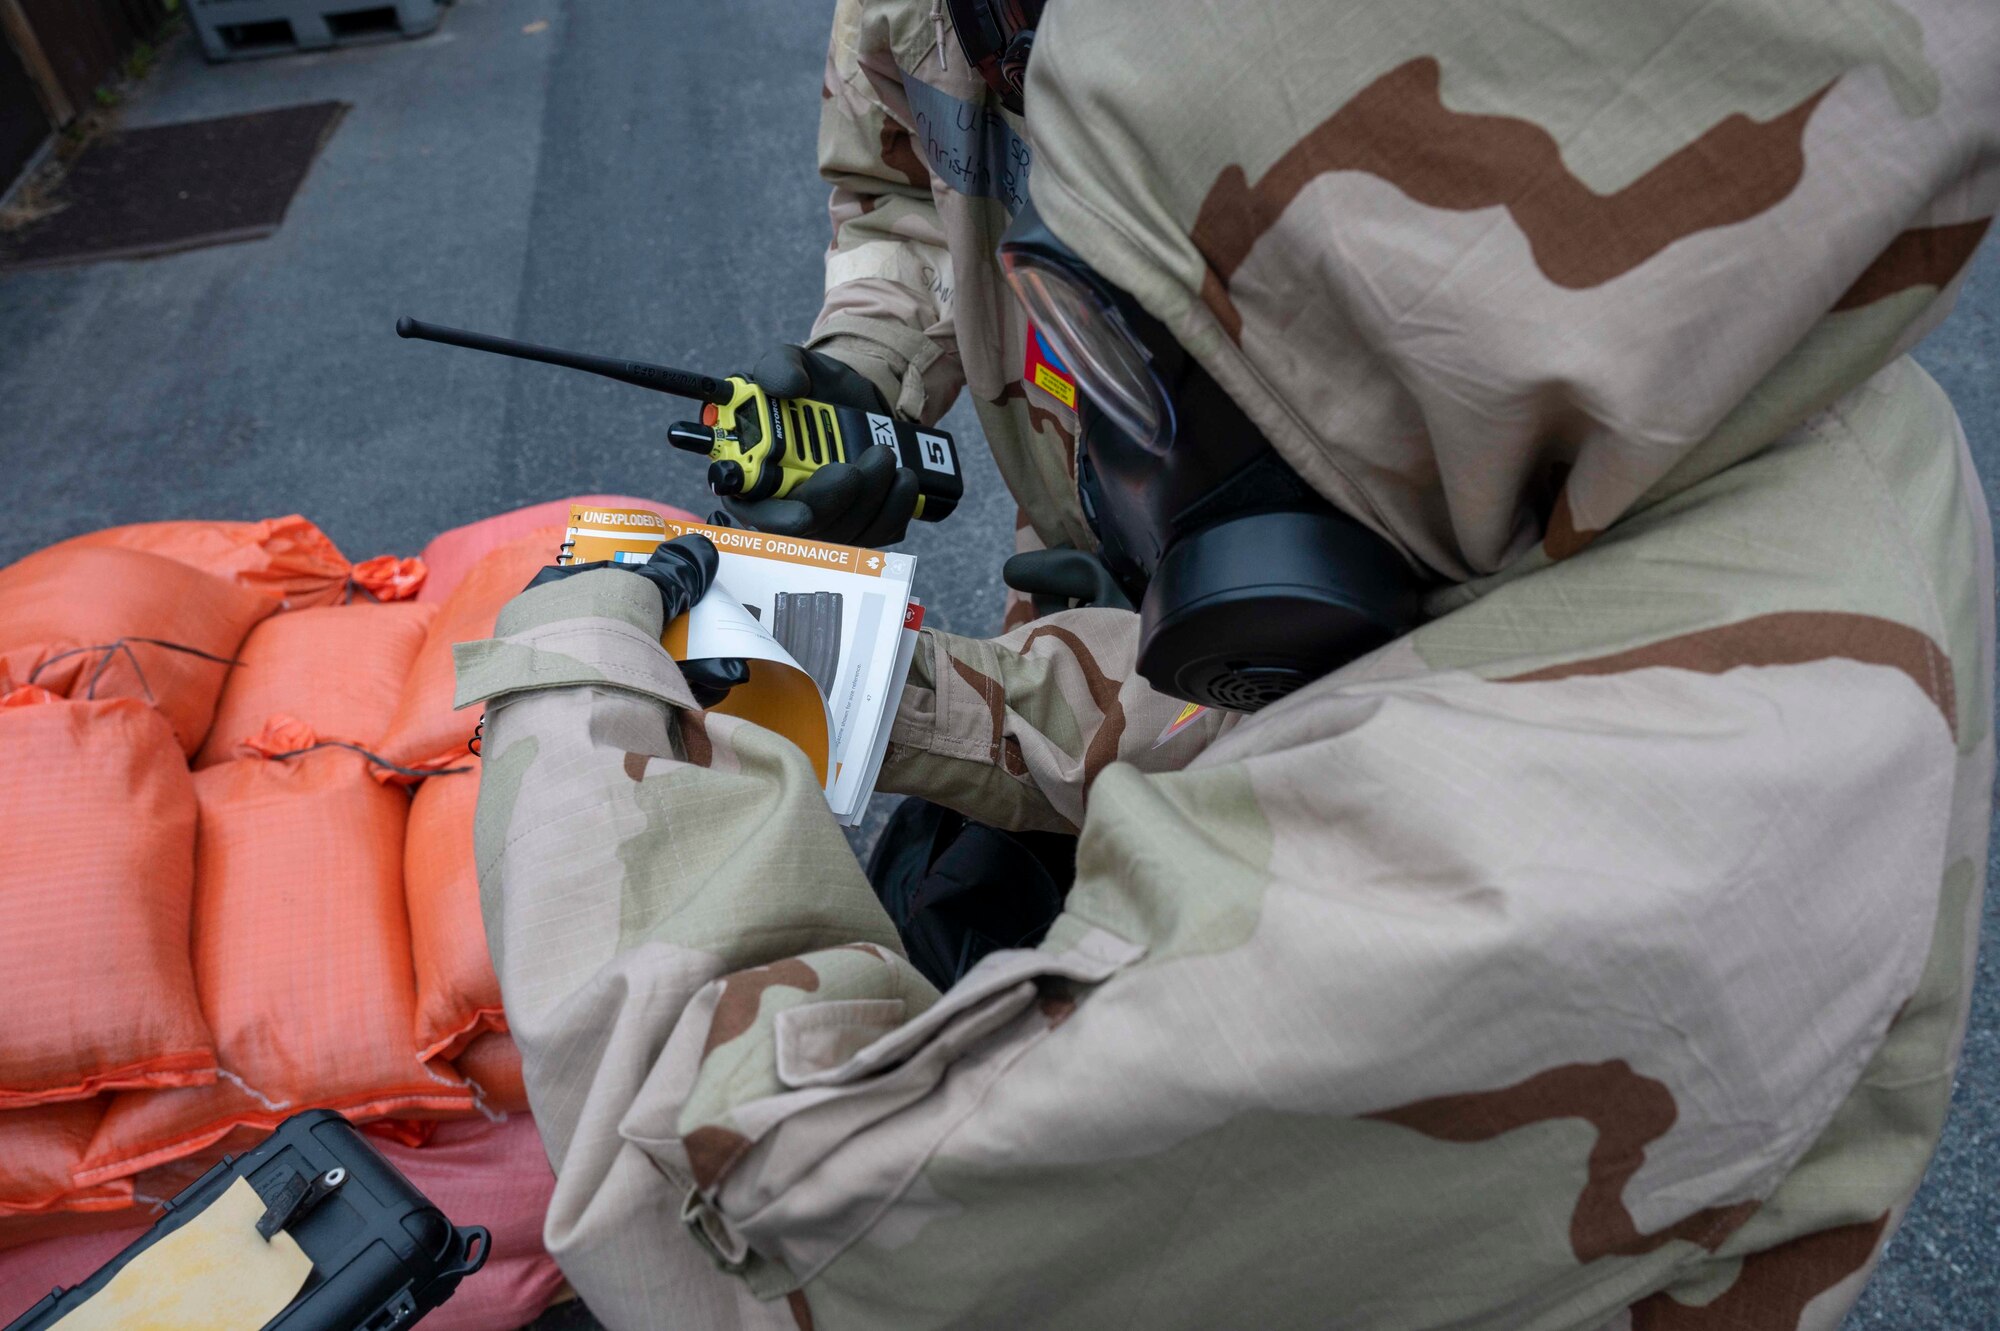 An airman attempts to identify a CBRN contamination.